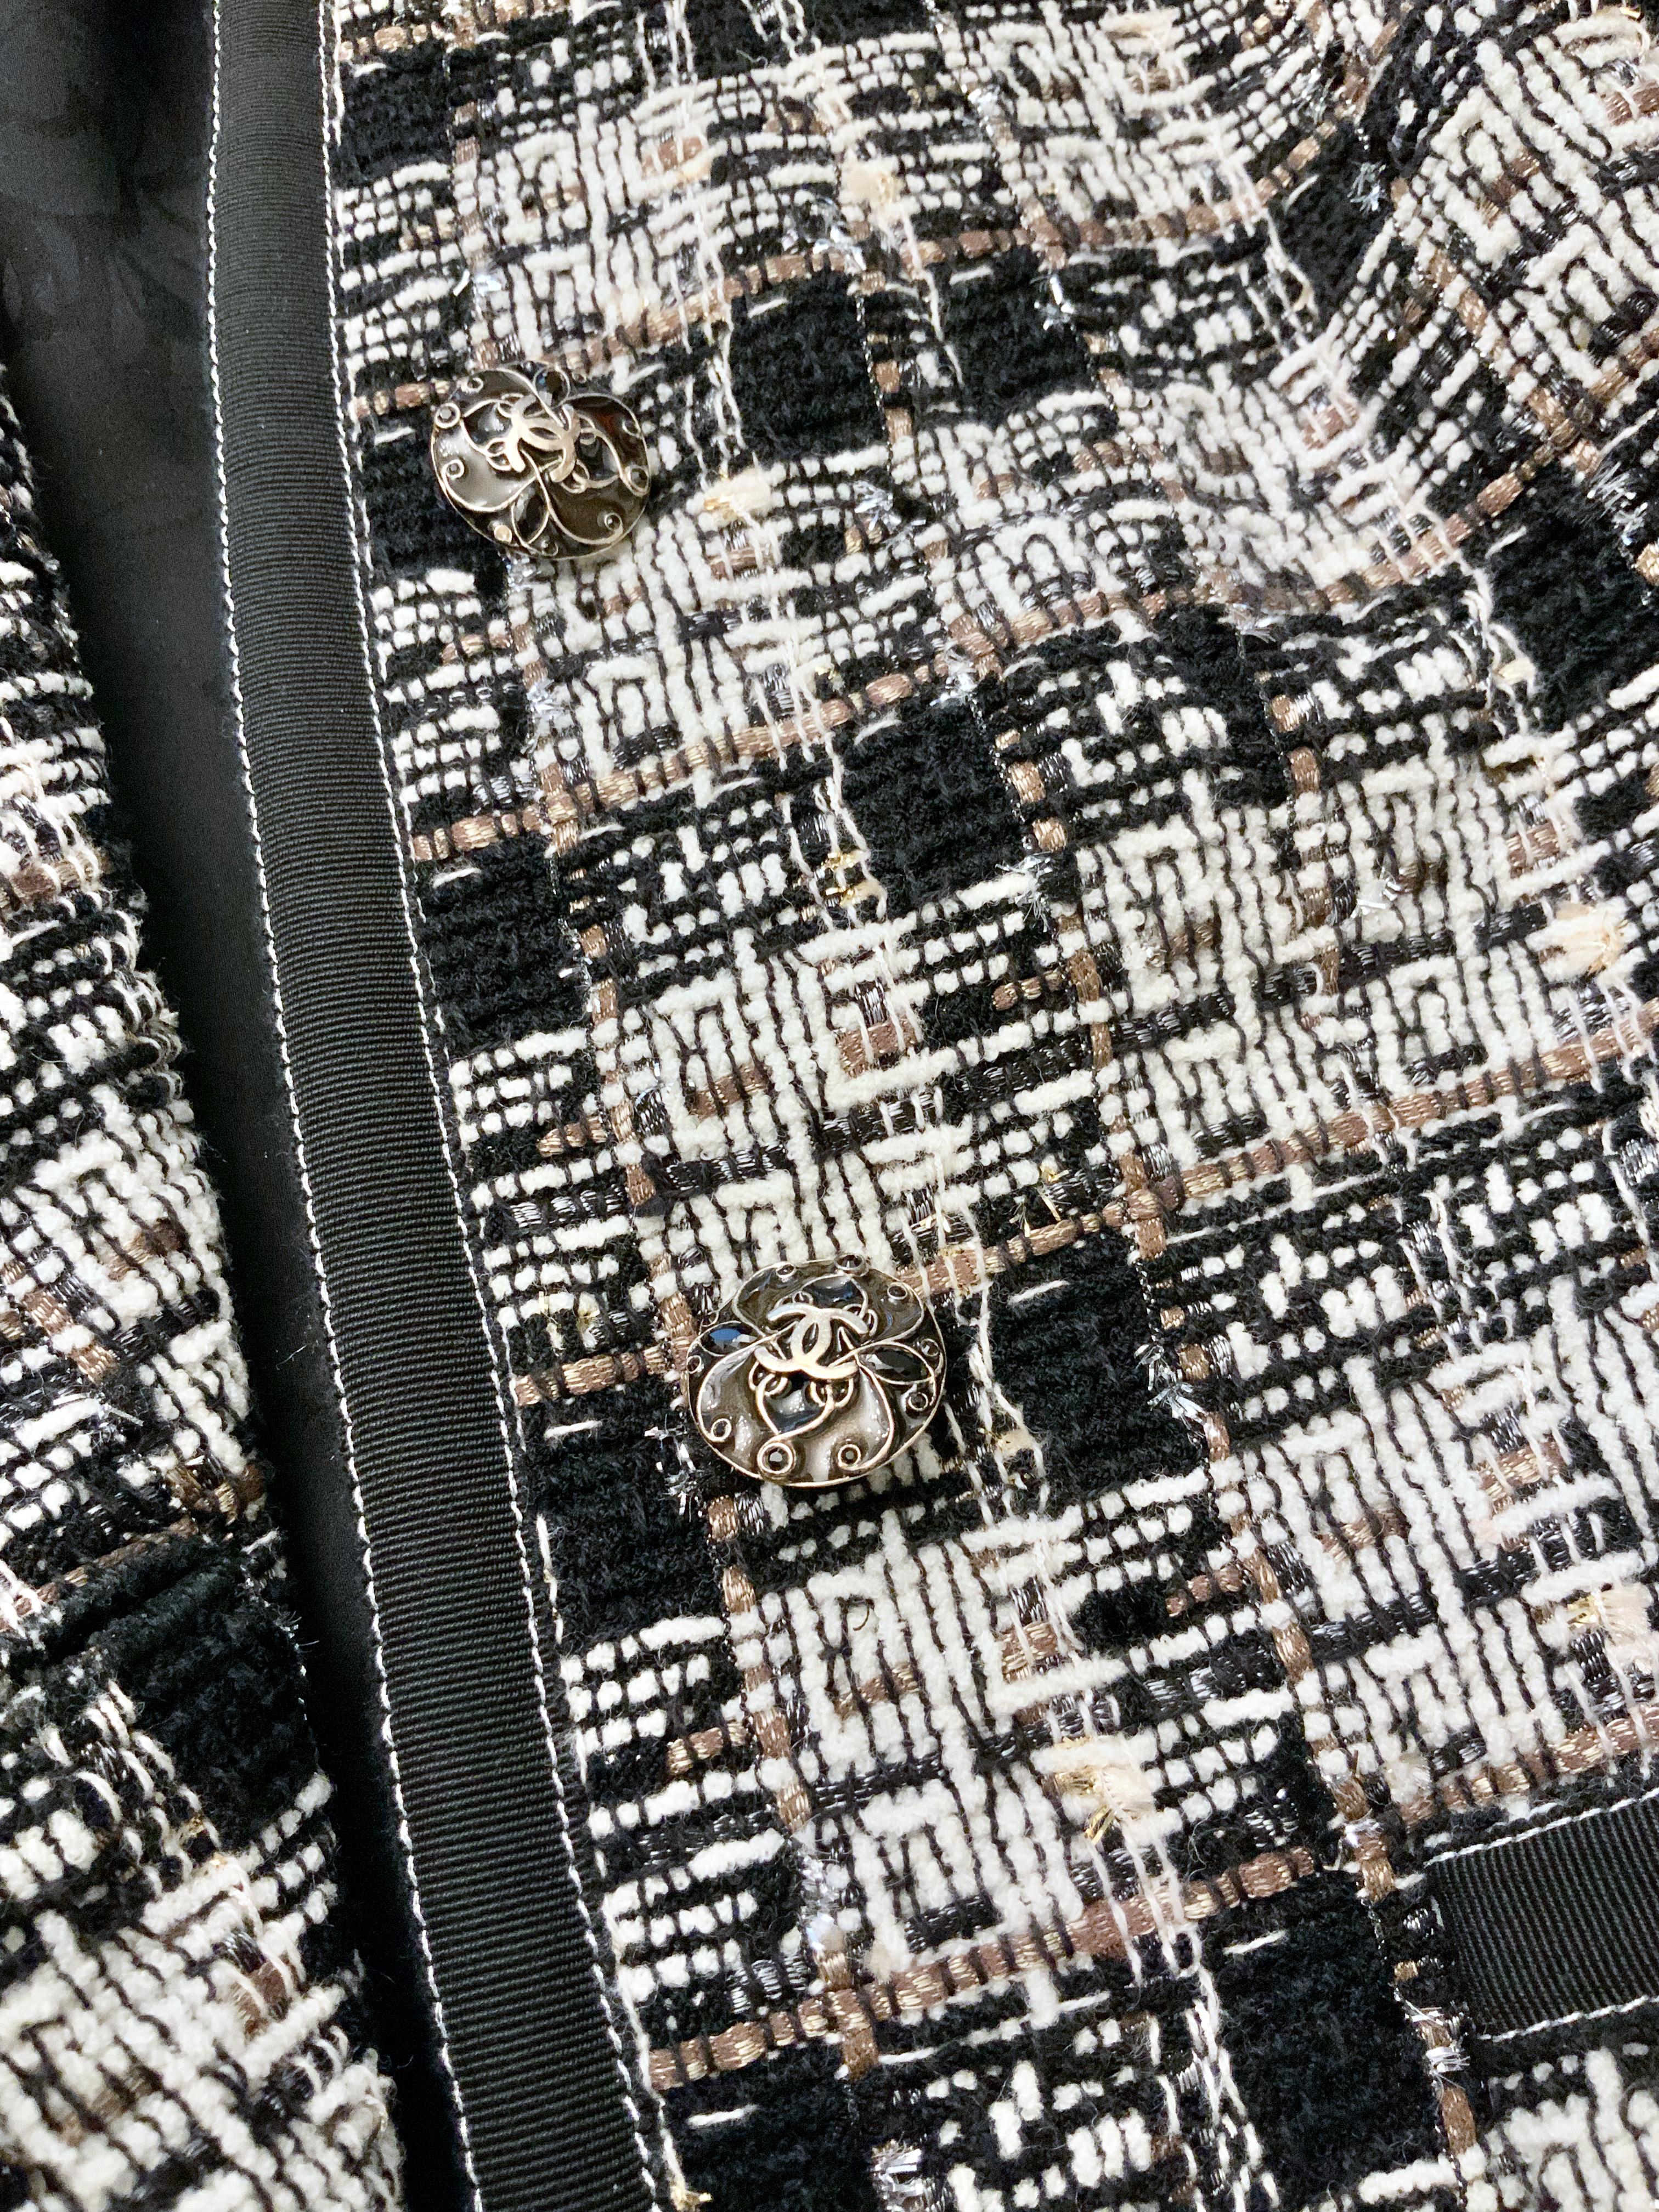 Women's Chanel Fall 2008 Black and White Tweed Jacket